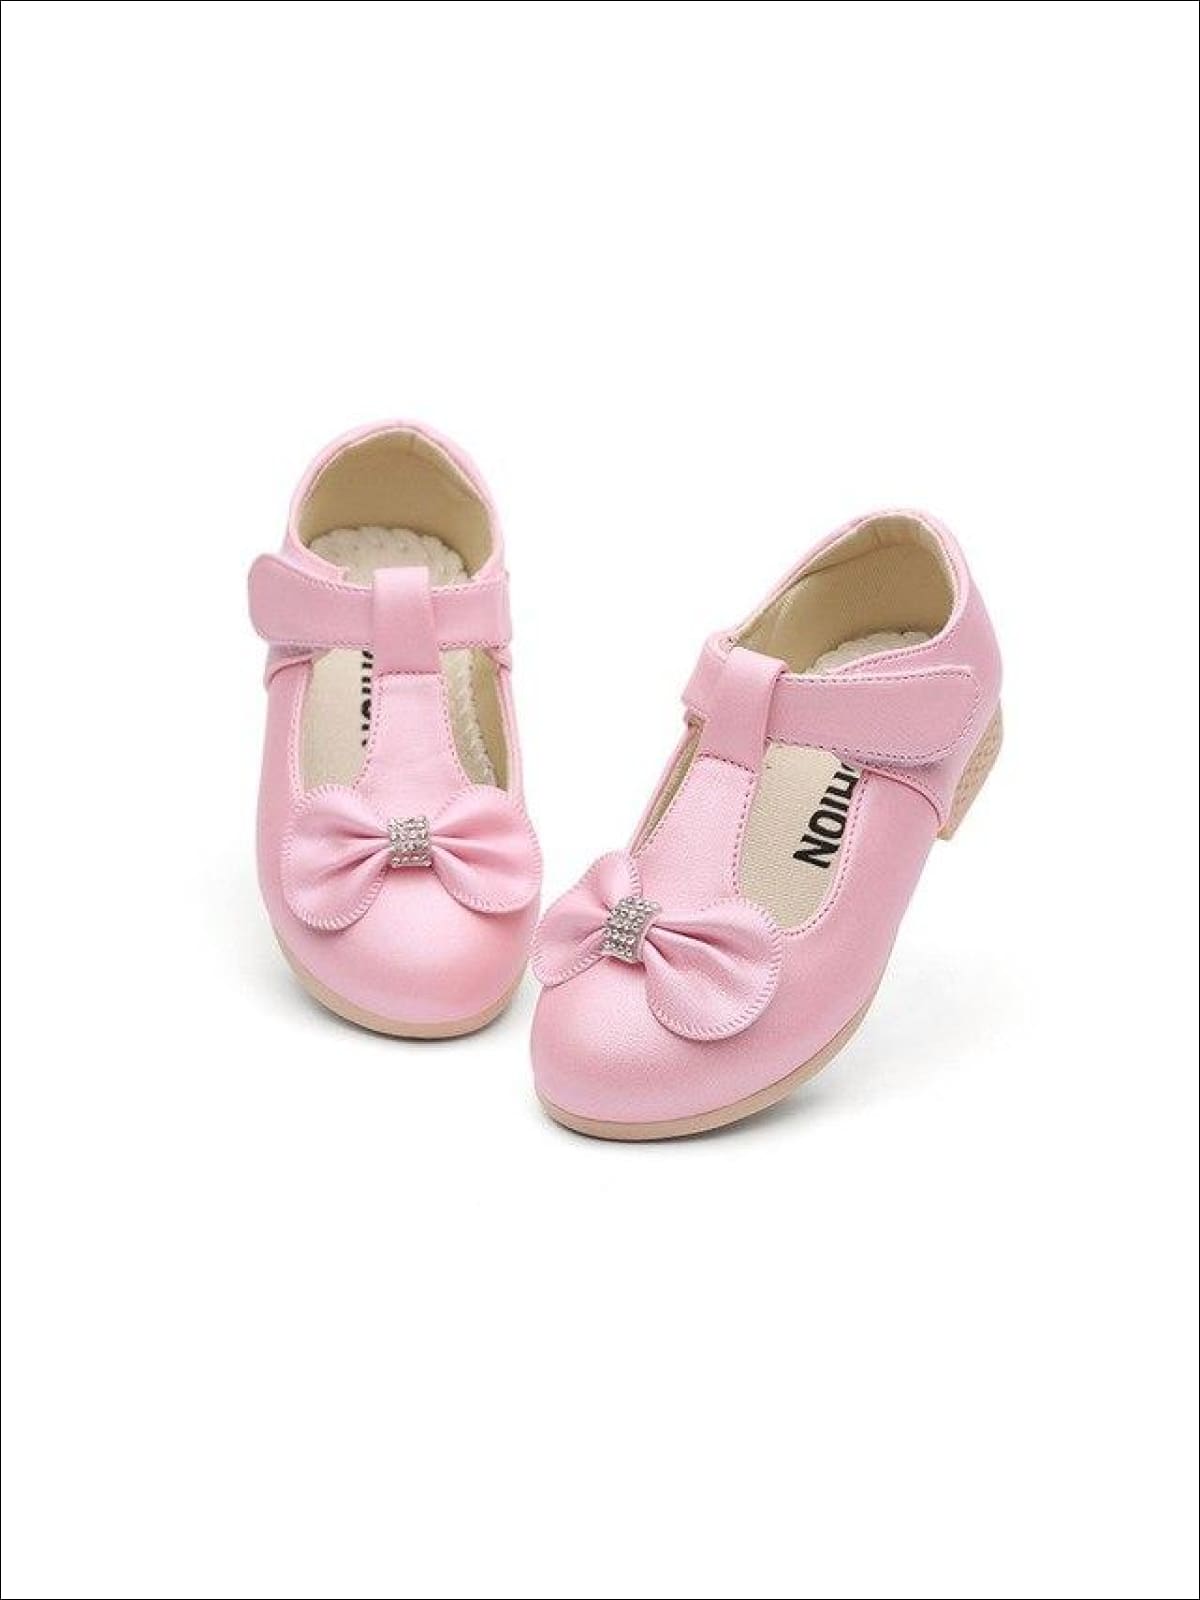 Girls Bow Tie Embellished Mary Jane Flats - pink / 1 - Girls Flats